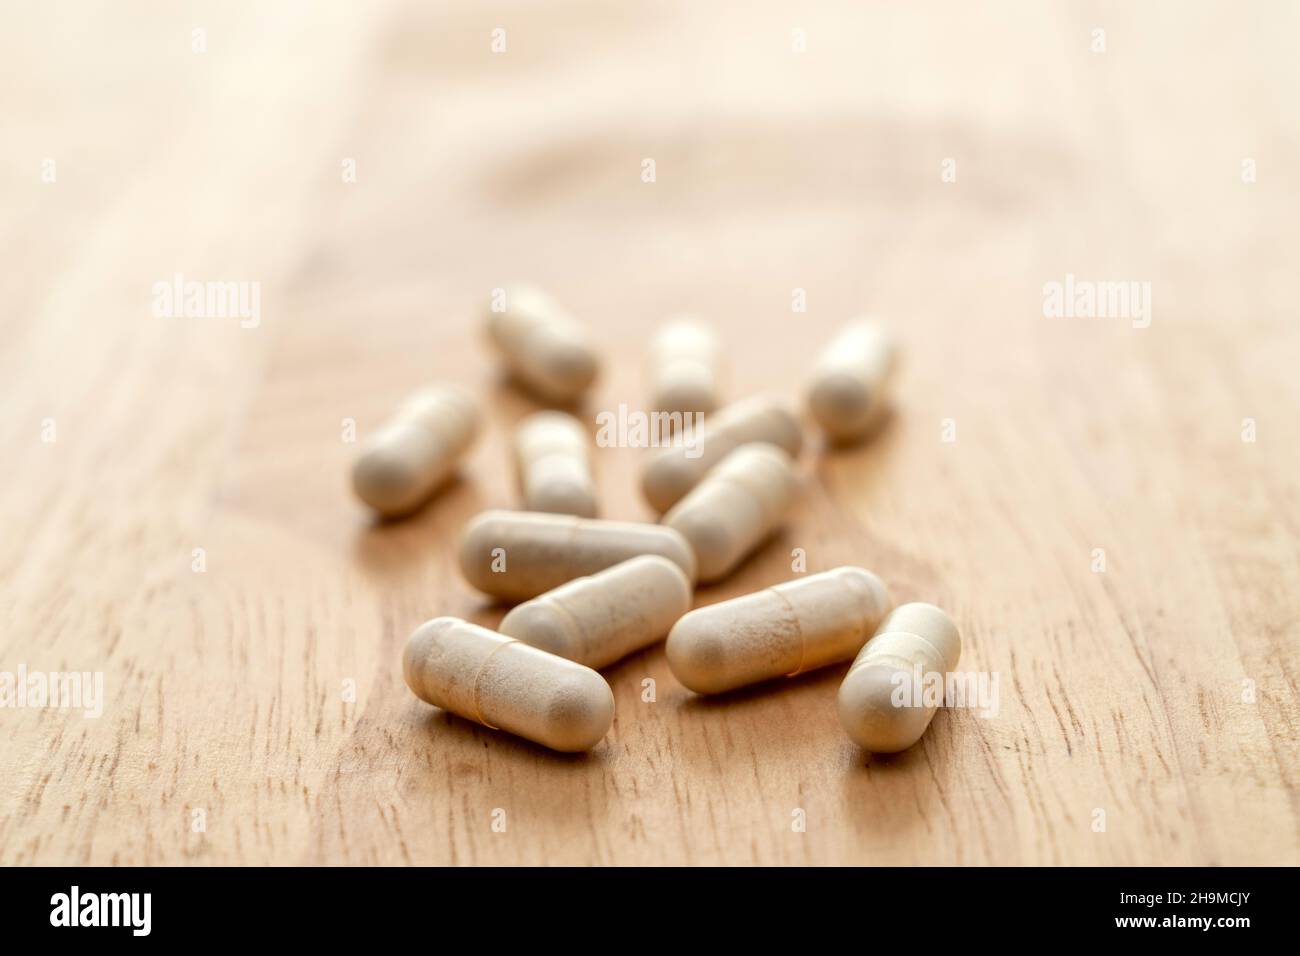 Vitamin supplement capsules - shallow depth of field Stock Photo